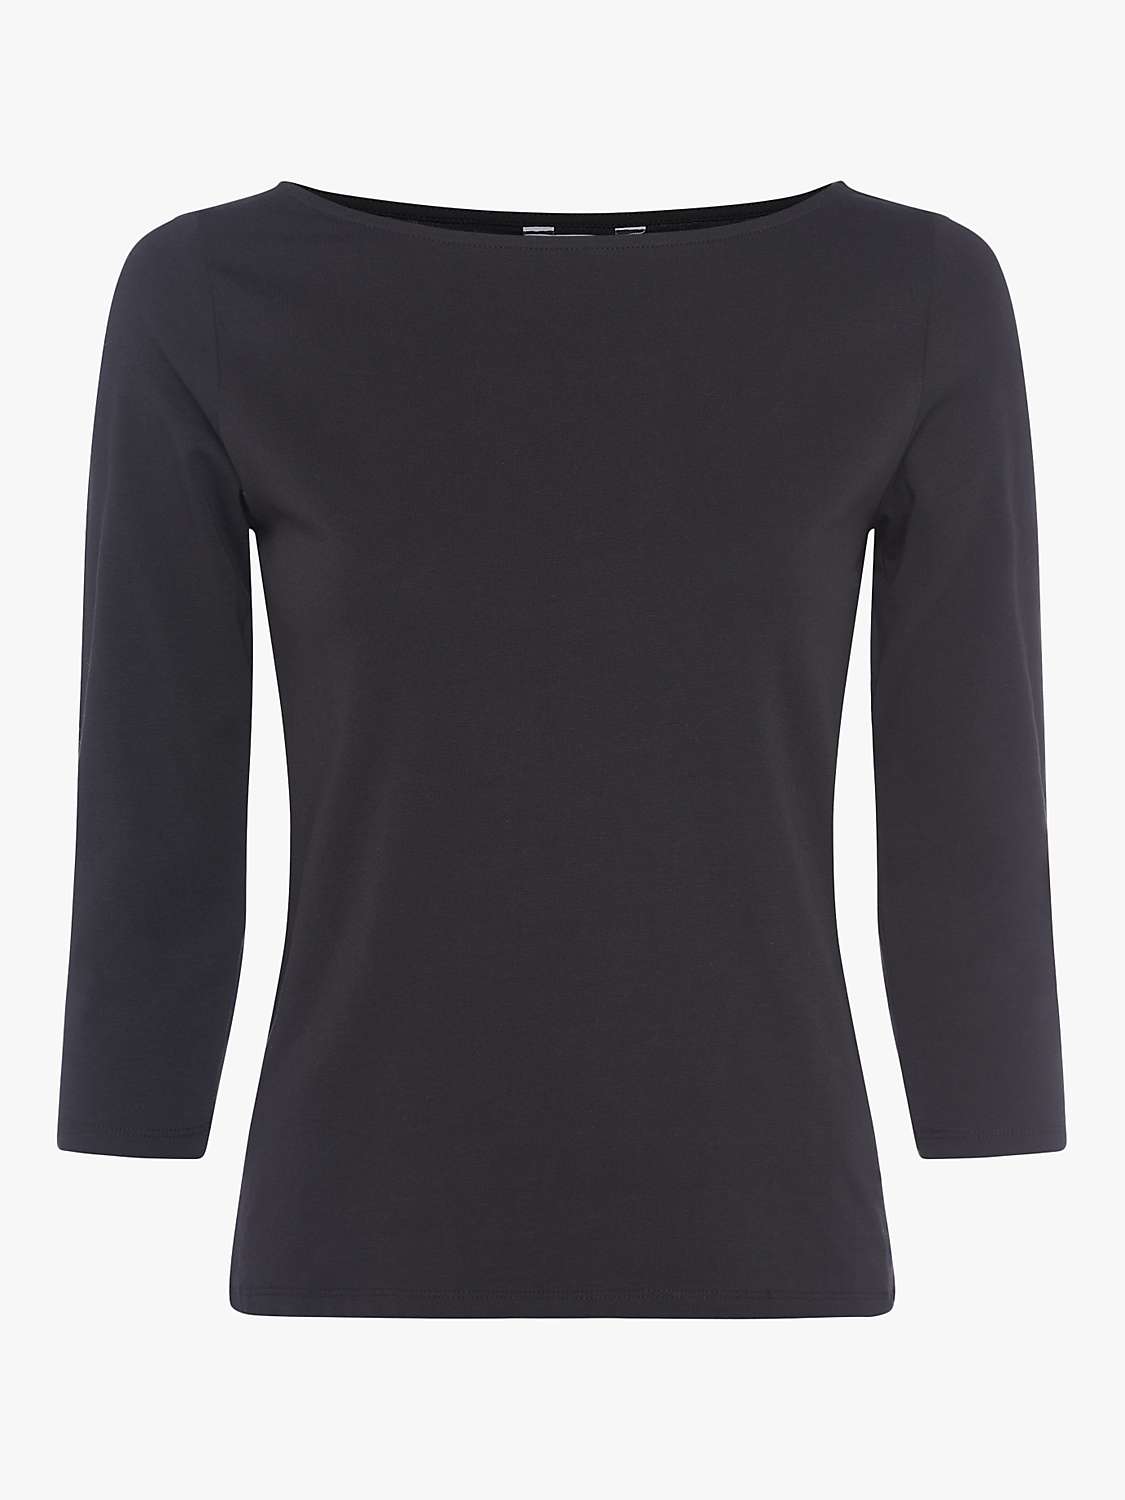 Buy Great Plains Organic Cotton 3/4 Sleeve Top Online at johnlewis.com